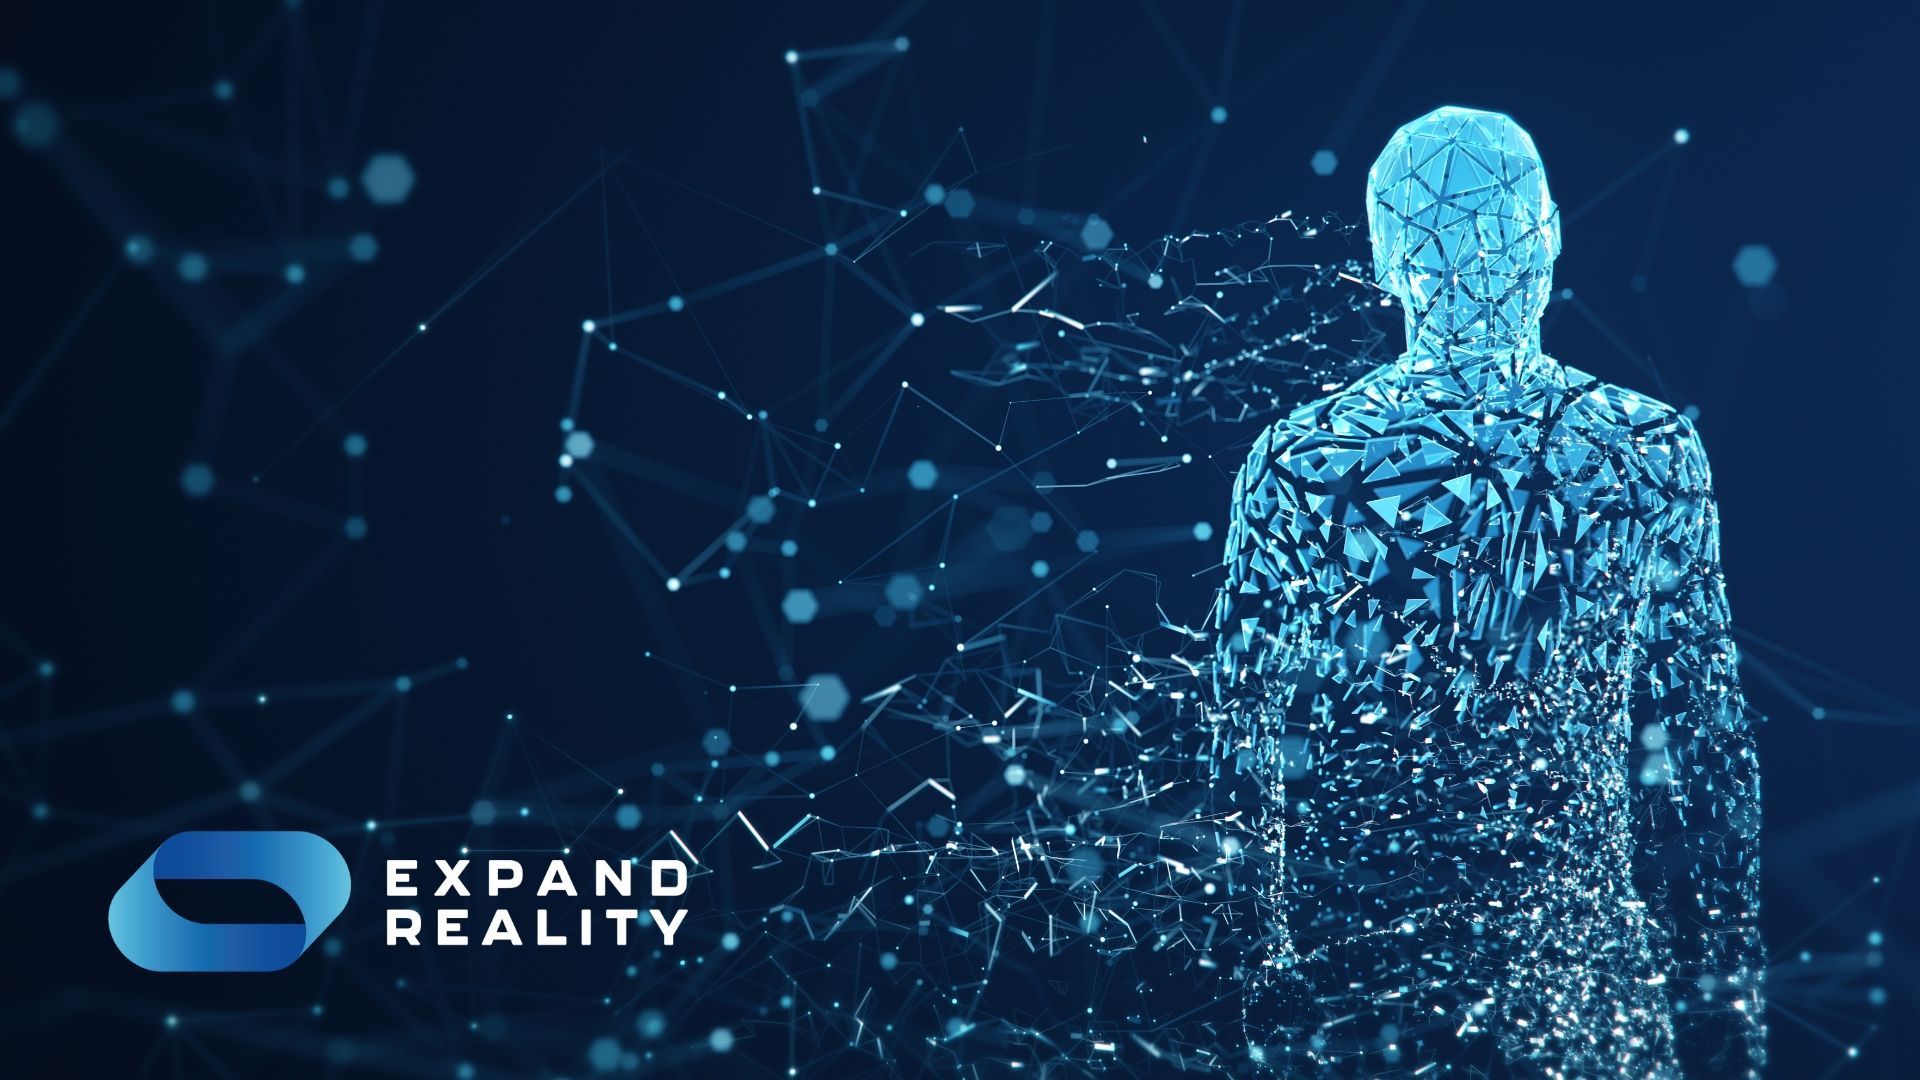 What is transhumanism and how does XR fit into it? Join us as we explore the weird and wonderful world of AGI, nanotech and human immortality.